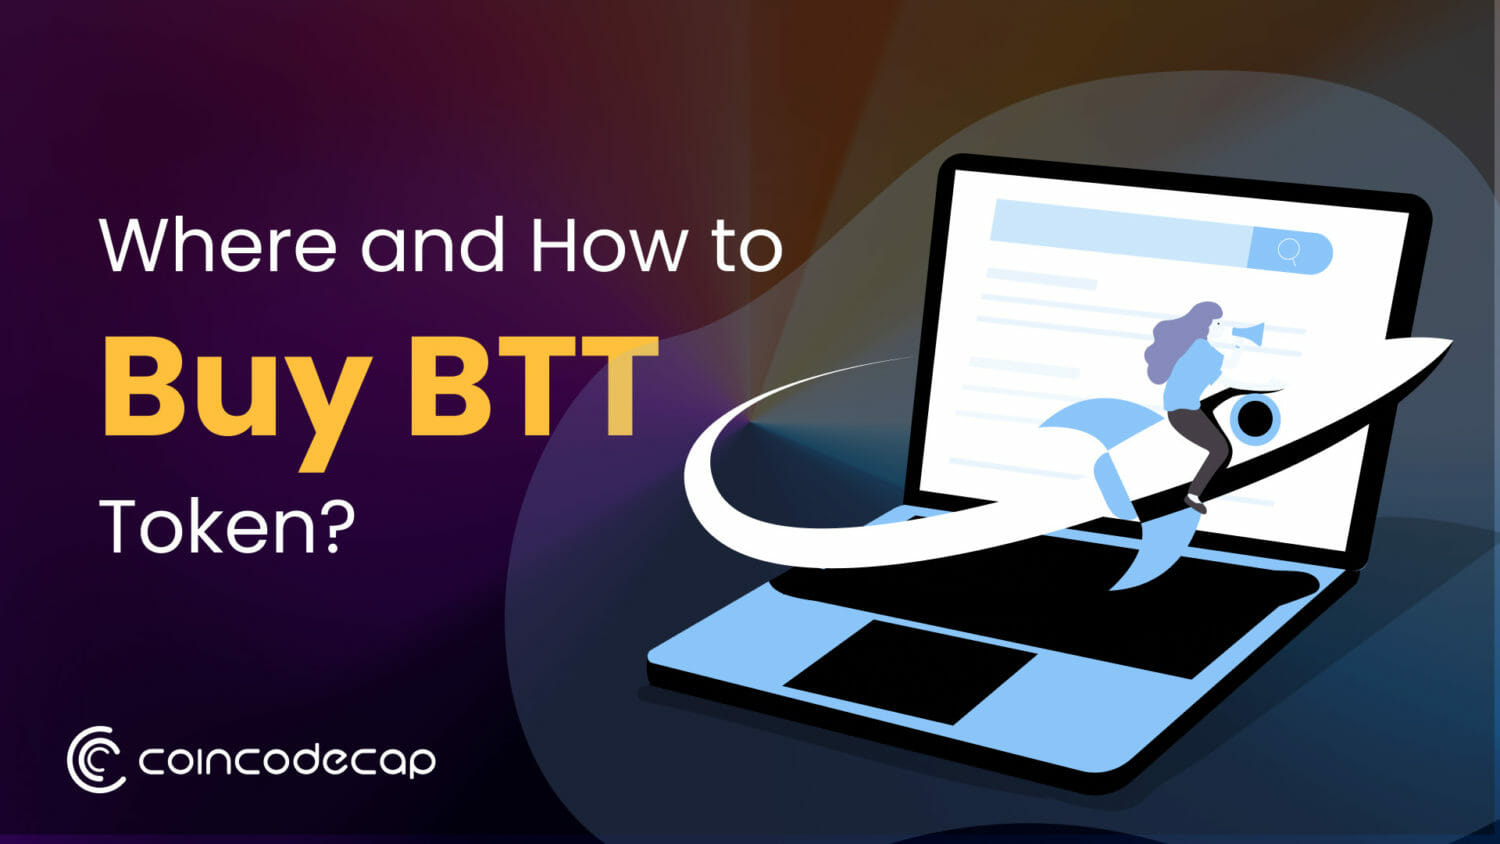 Where And How To Buy Btt Token 2021?